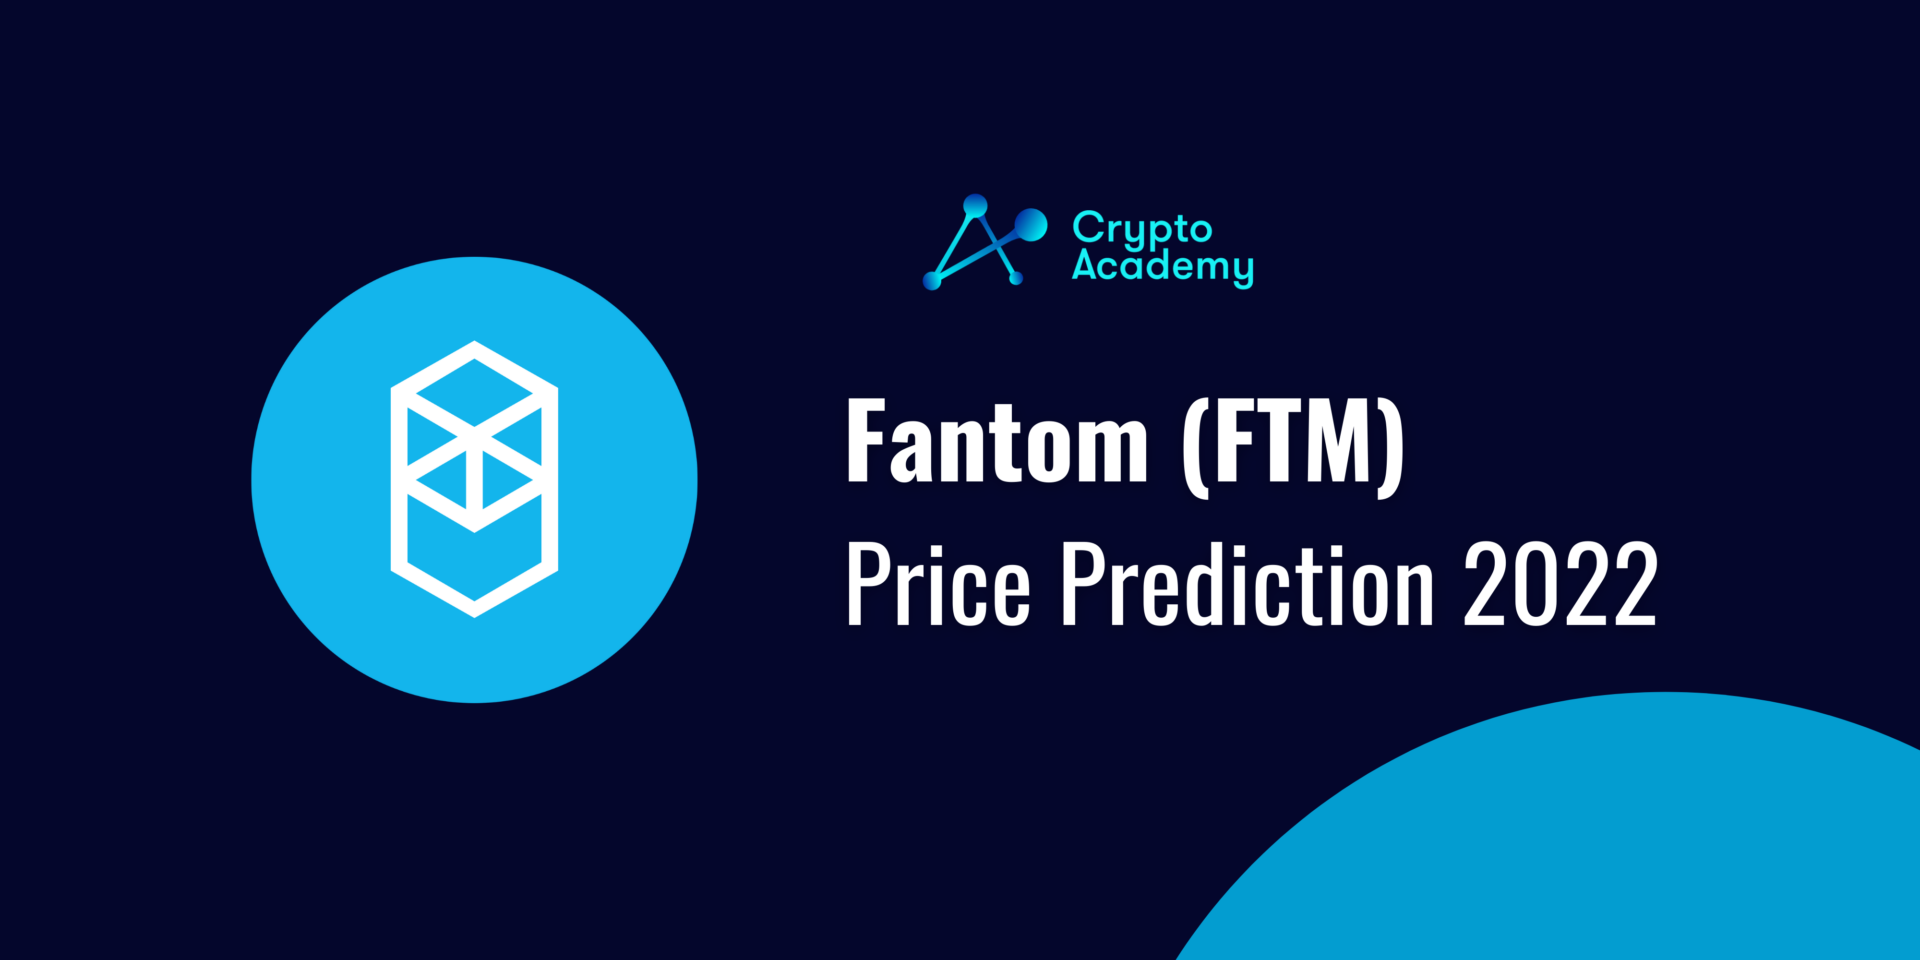 Fantom Price Prediction 2022 and Beyond - Will FTM reach $10?